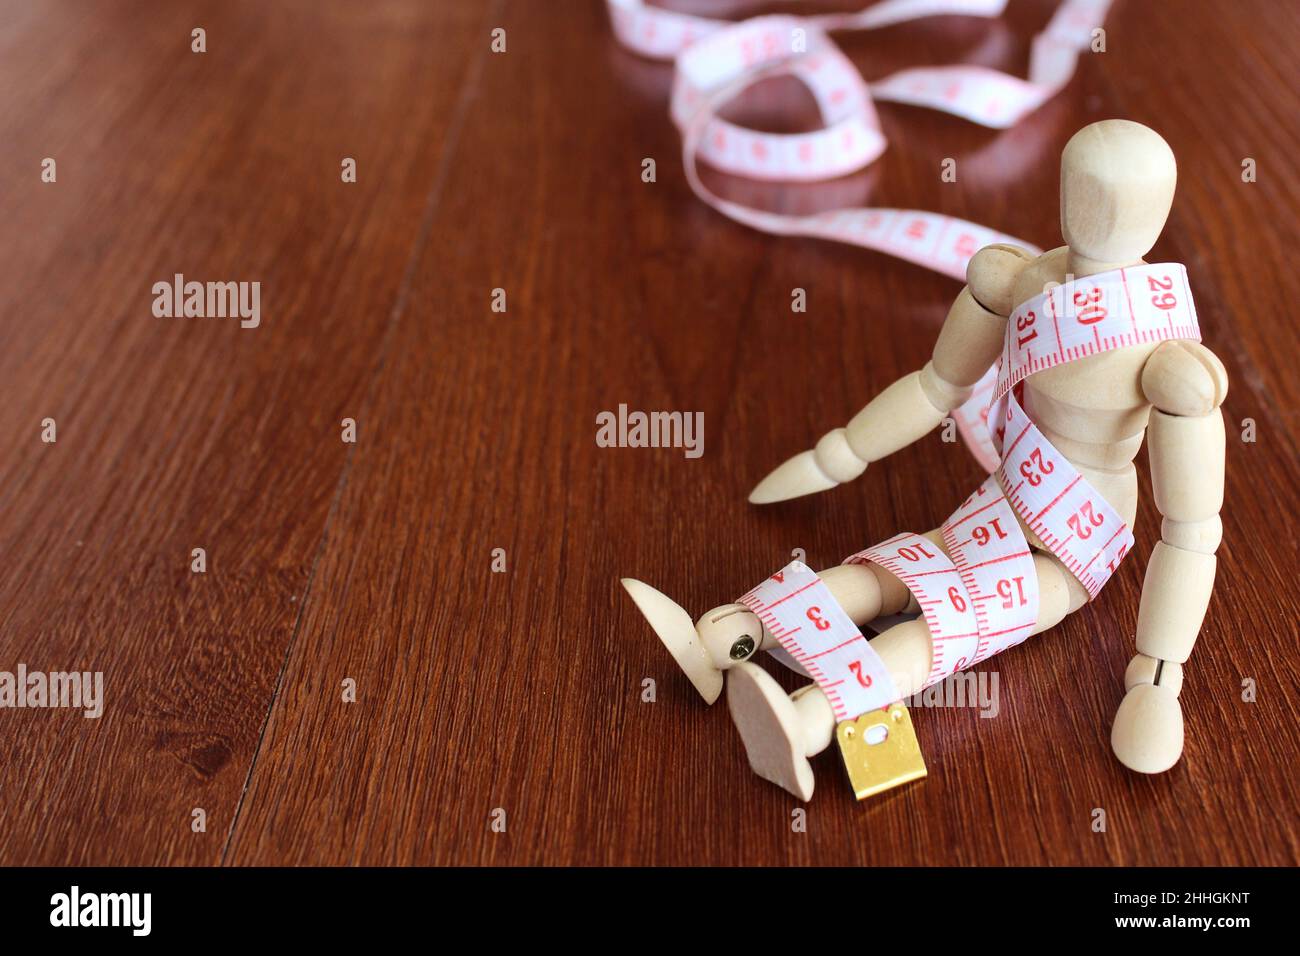 Weight management, diet concept. Wooden doll and measuring tape with copy space for text. Stock Photo